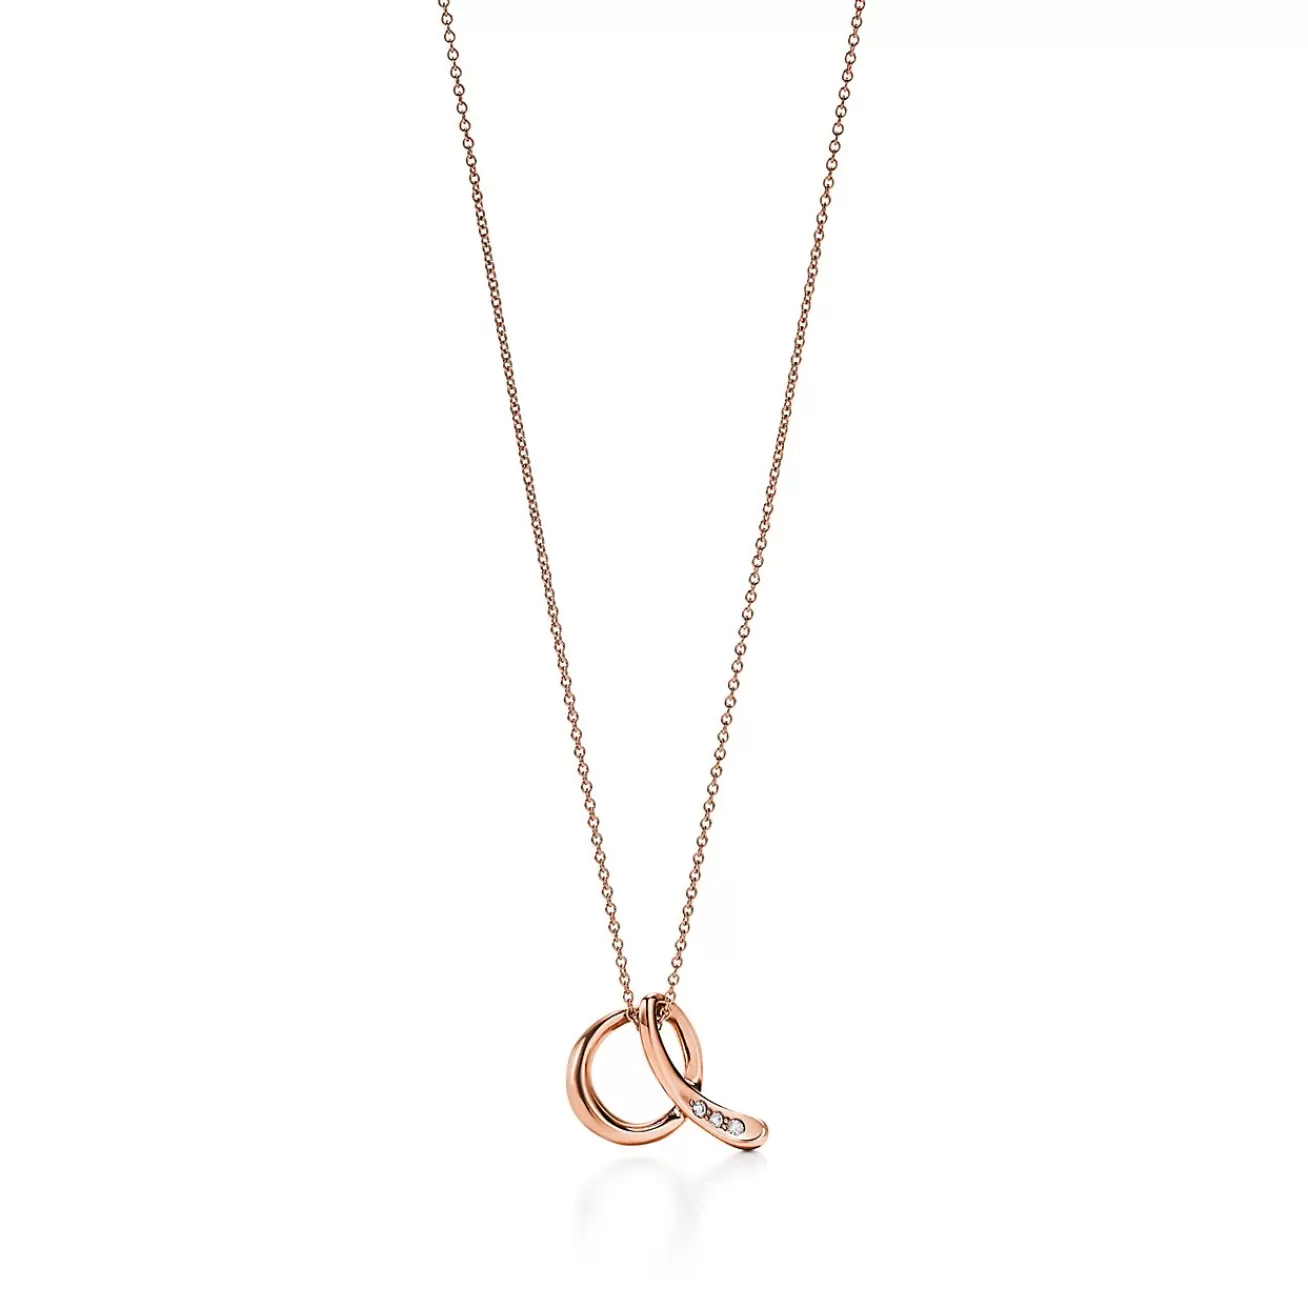 Tiffany & Co. Elsa Peretti® Alphabet pendant in 18k rose gold. Letters A-Z available. | ^ Necklaces & Pendants | Rose Gold Jewelry